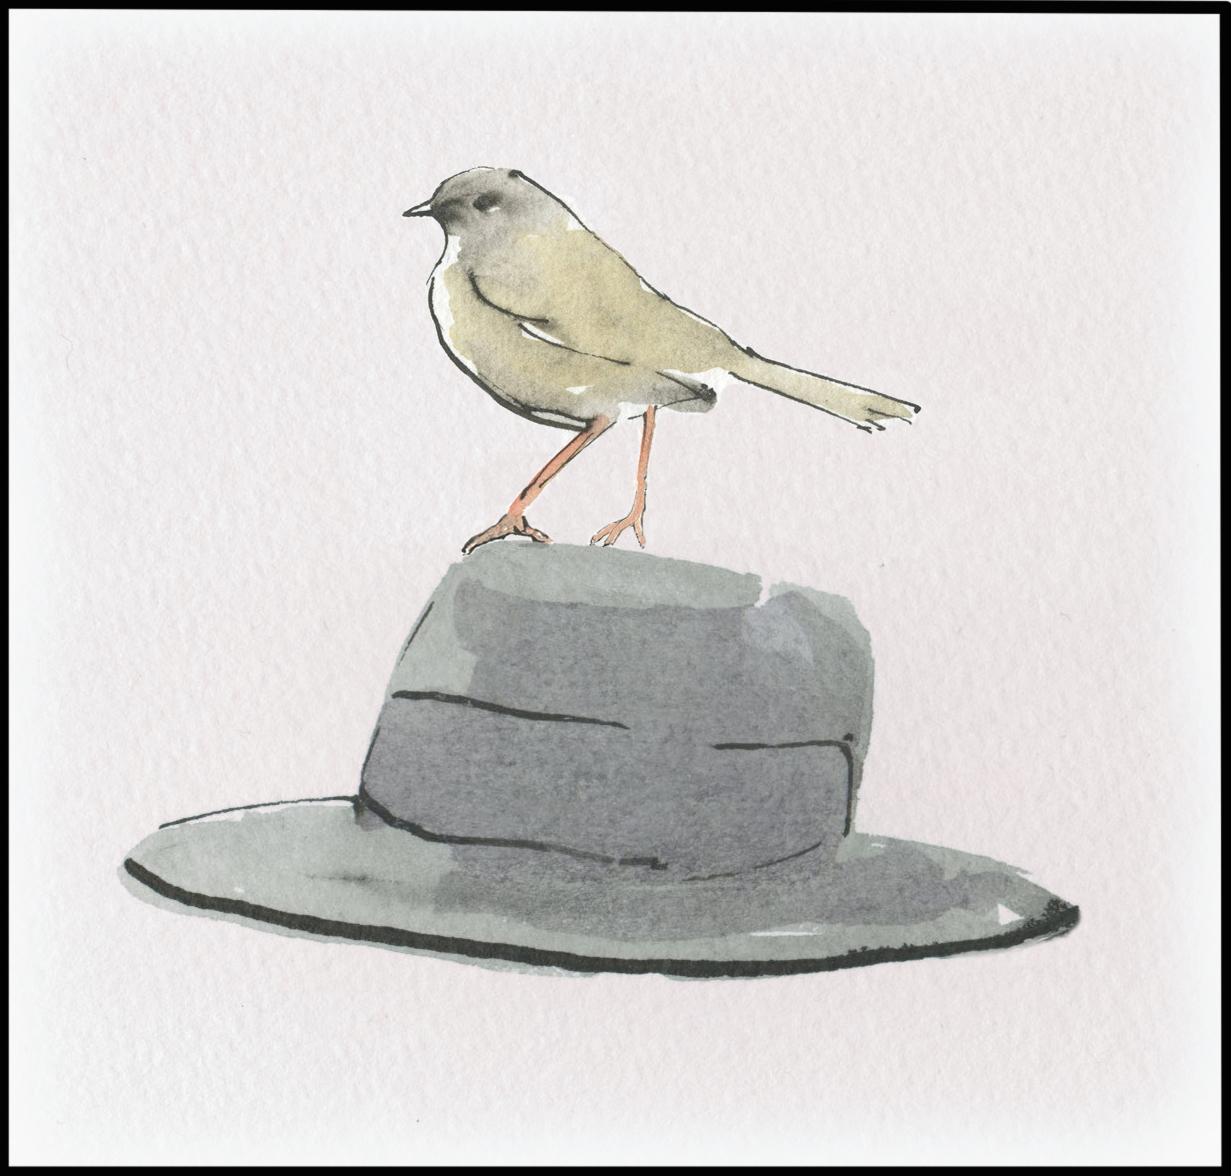 Hedge-sparrow on top of Saki's hat, by
                          Tim Saunders